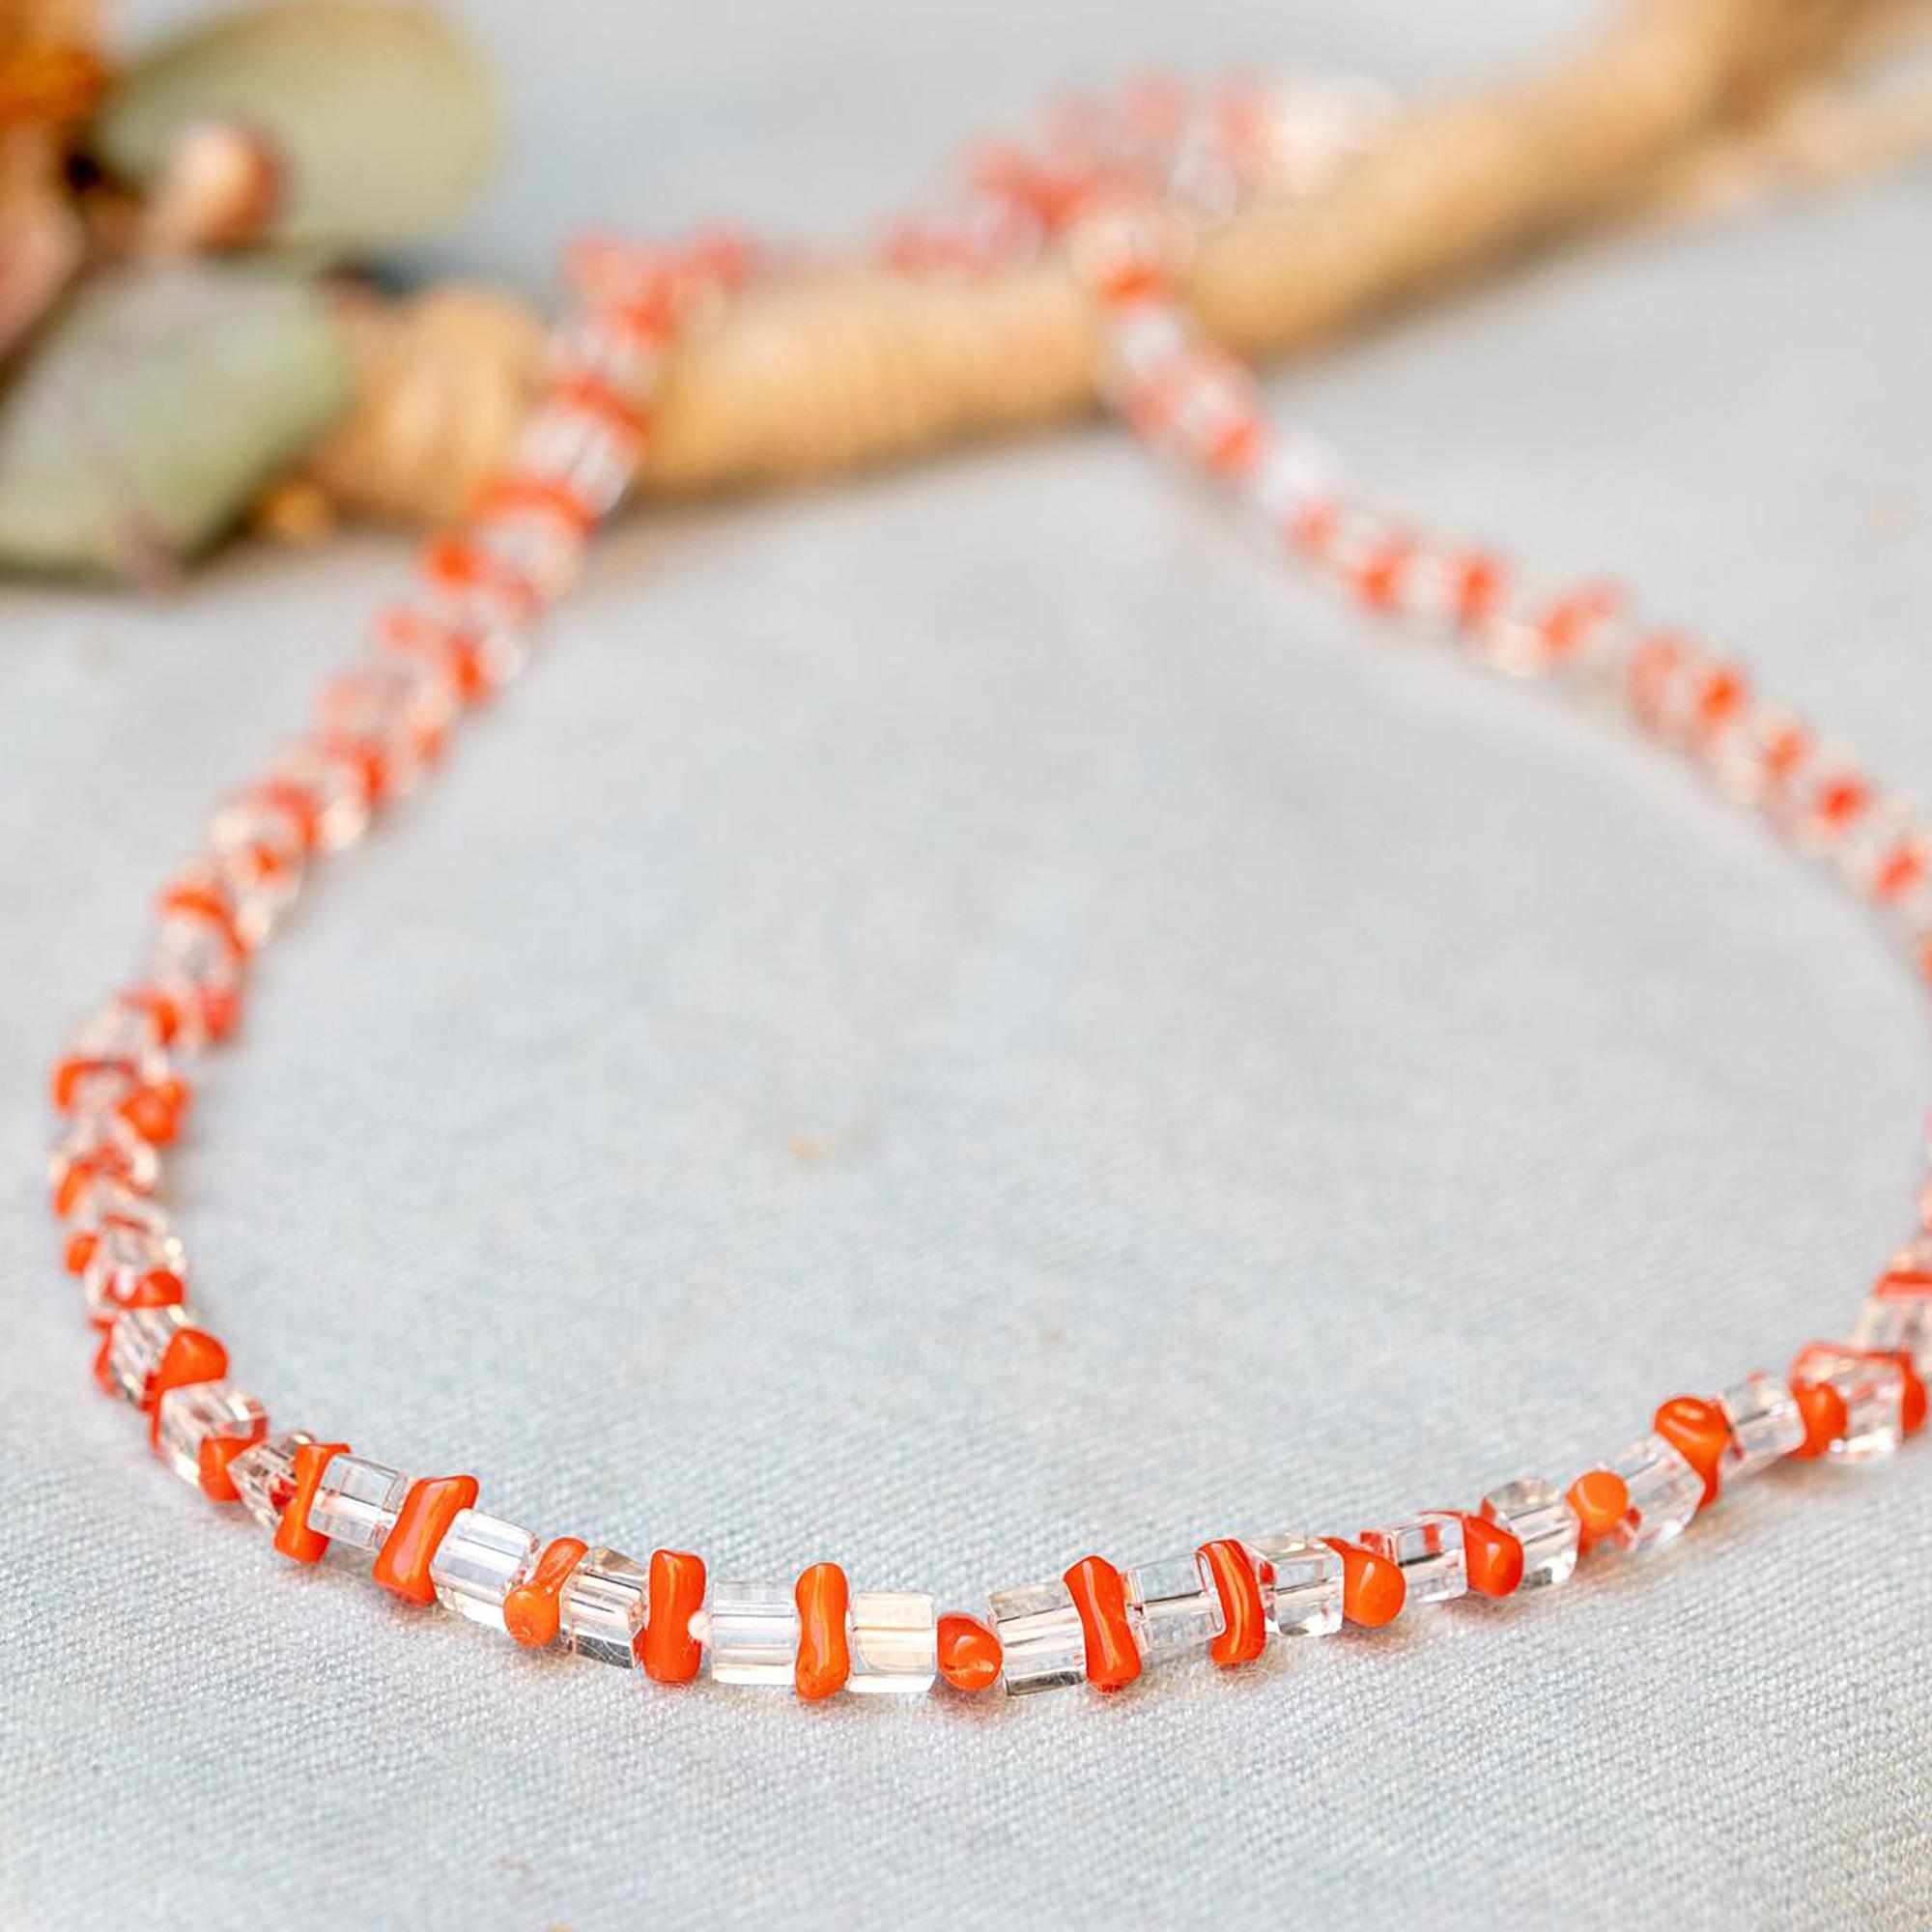 Artisan Intini Jewels Sterling Silver Italian Handmade Rock Crystal Coral Boho Necklace For Sale